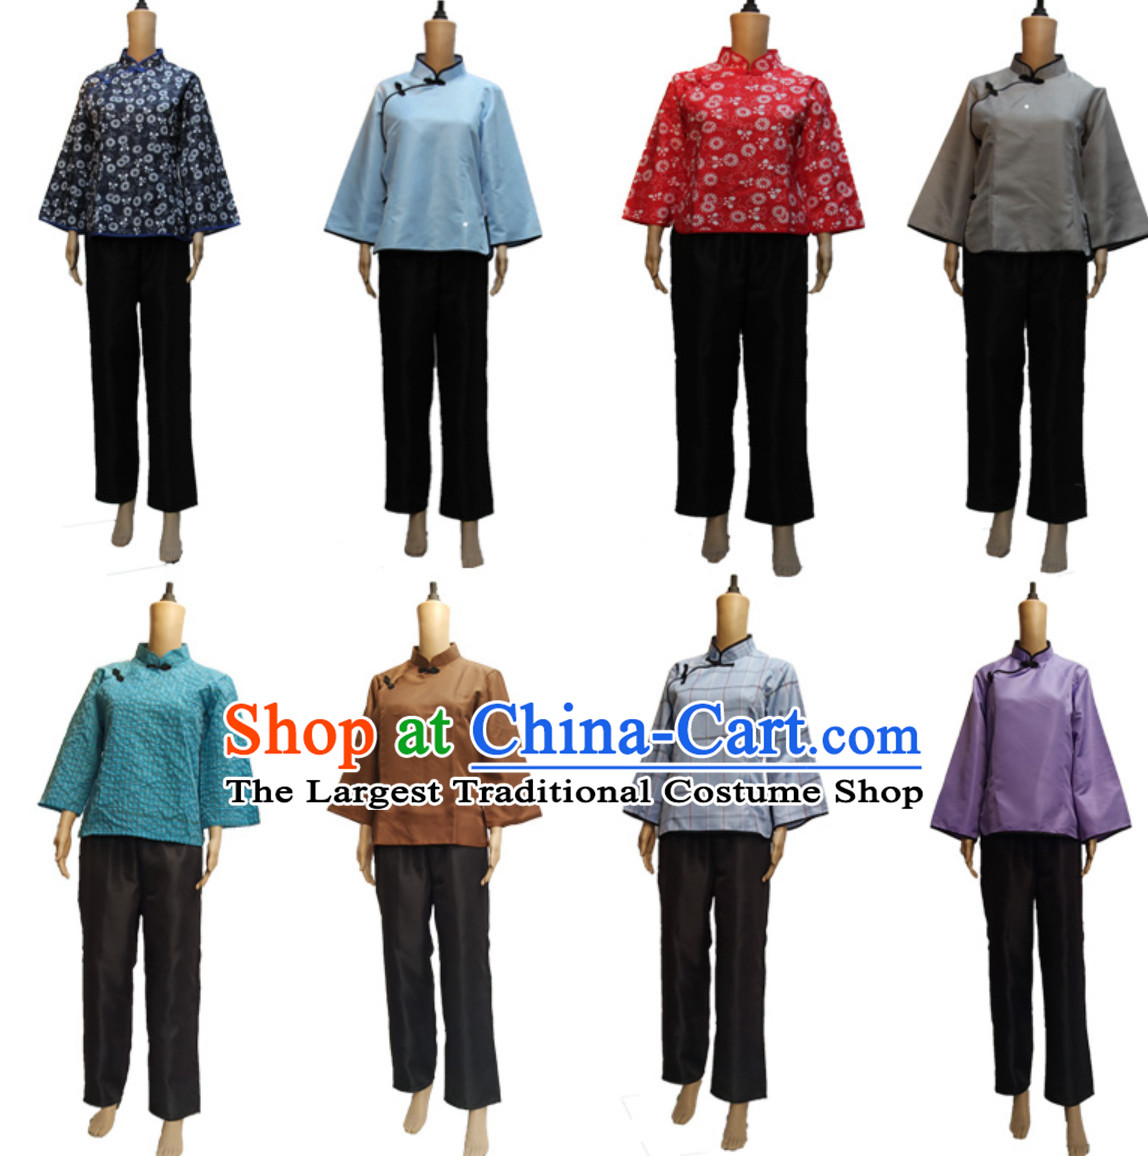 Traditional Chinese Poor People Costume Farmer Costumes Chinese Civilian Costumes for Women